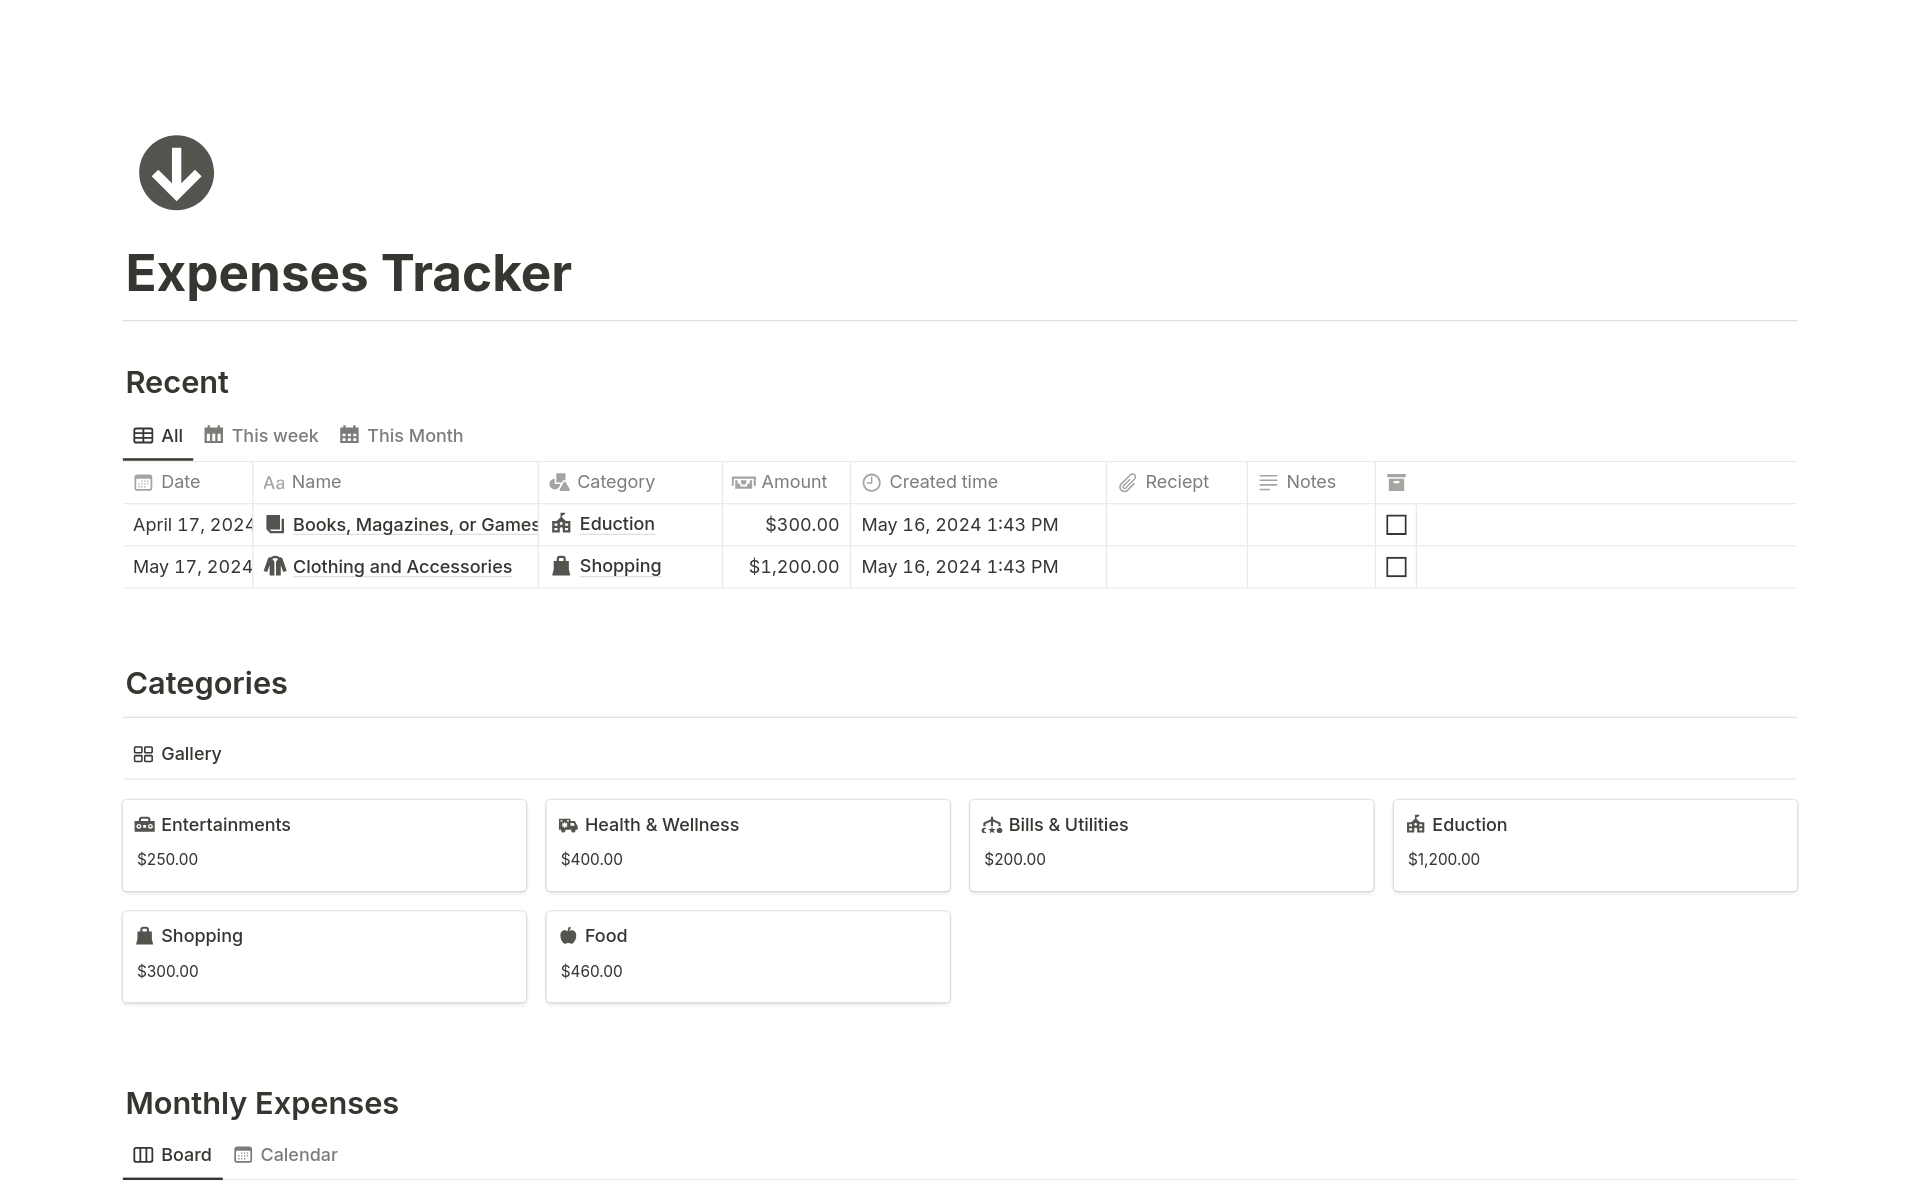 Monitor your daily expenses and spending with Notion.

A Notion template designed to help you track your expenses. With this template, you can gain valuable insights into your spending habits, identify unnecessary expenditures, and make informed decisions to improve your financia